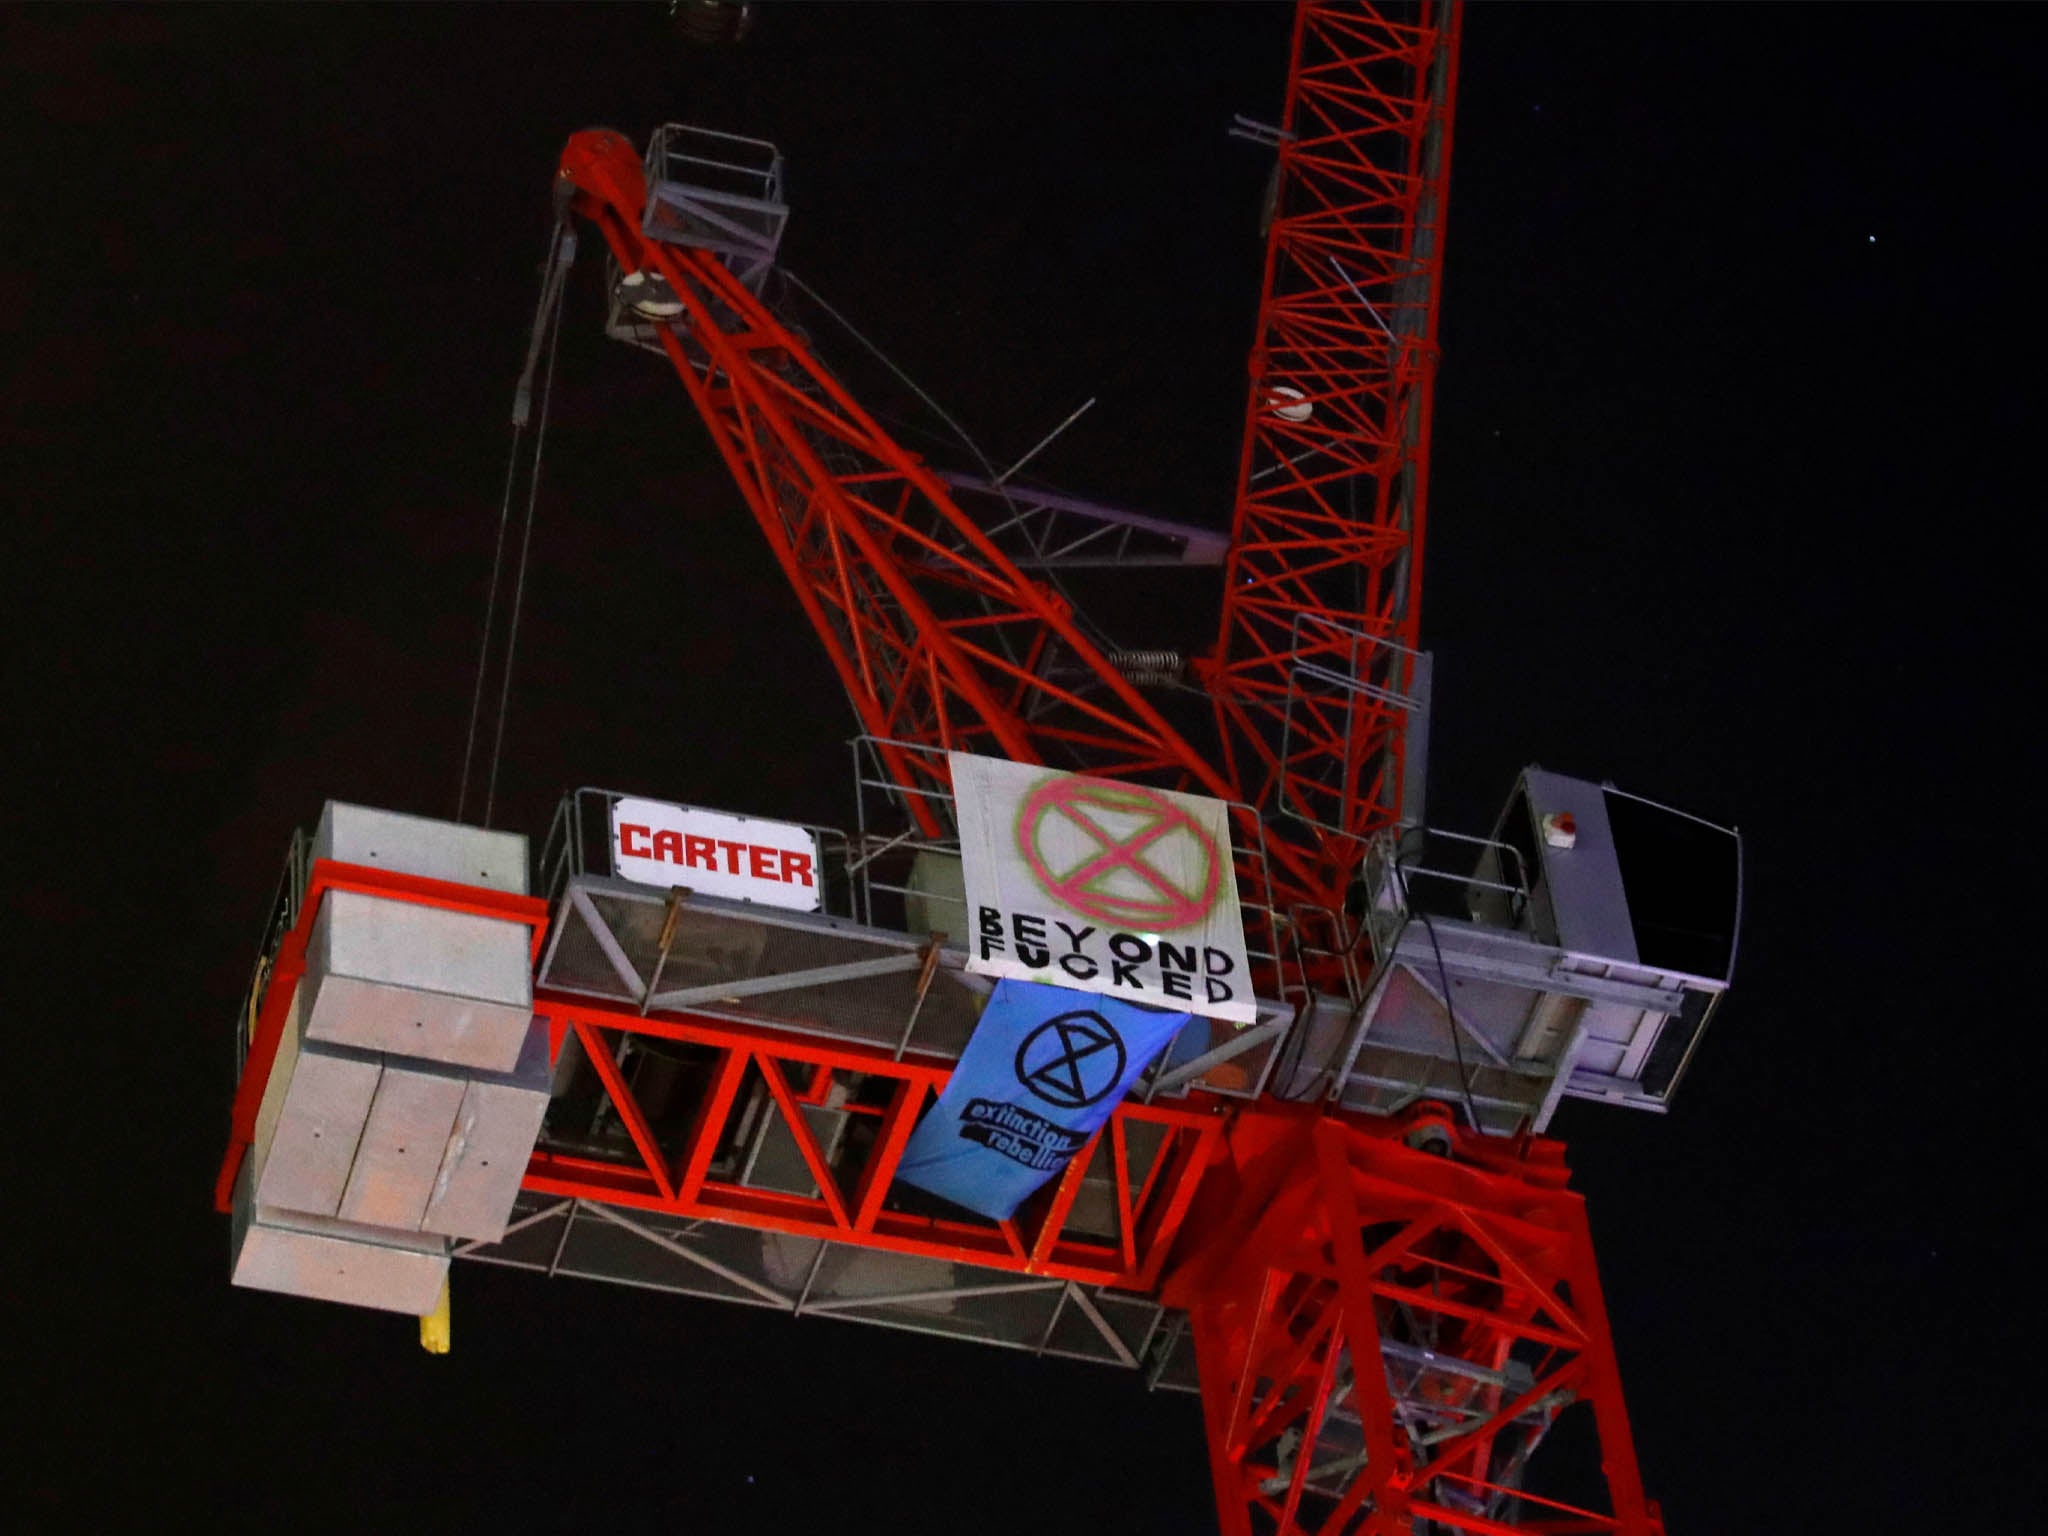 The teenage climate crisis activist from Extinction Rebellion staging the protest at the top of the crane, 7 November